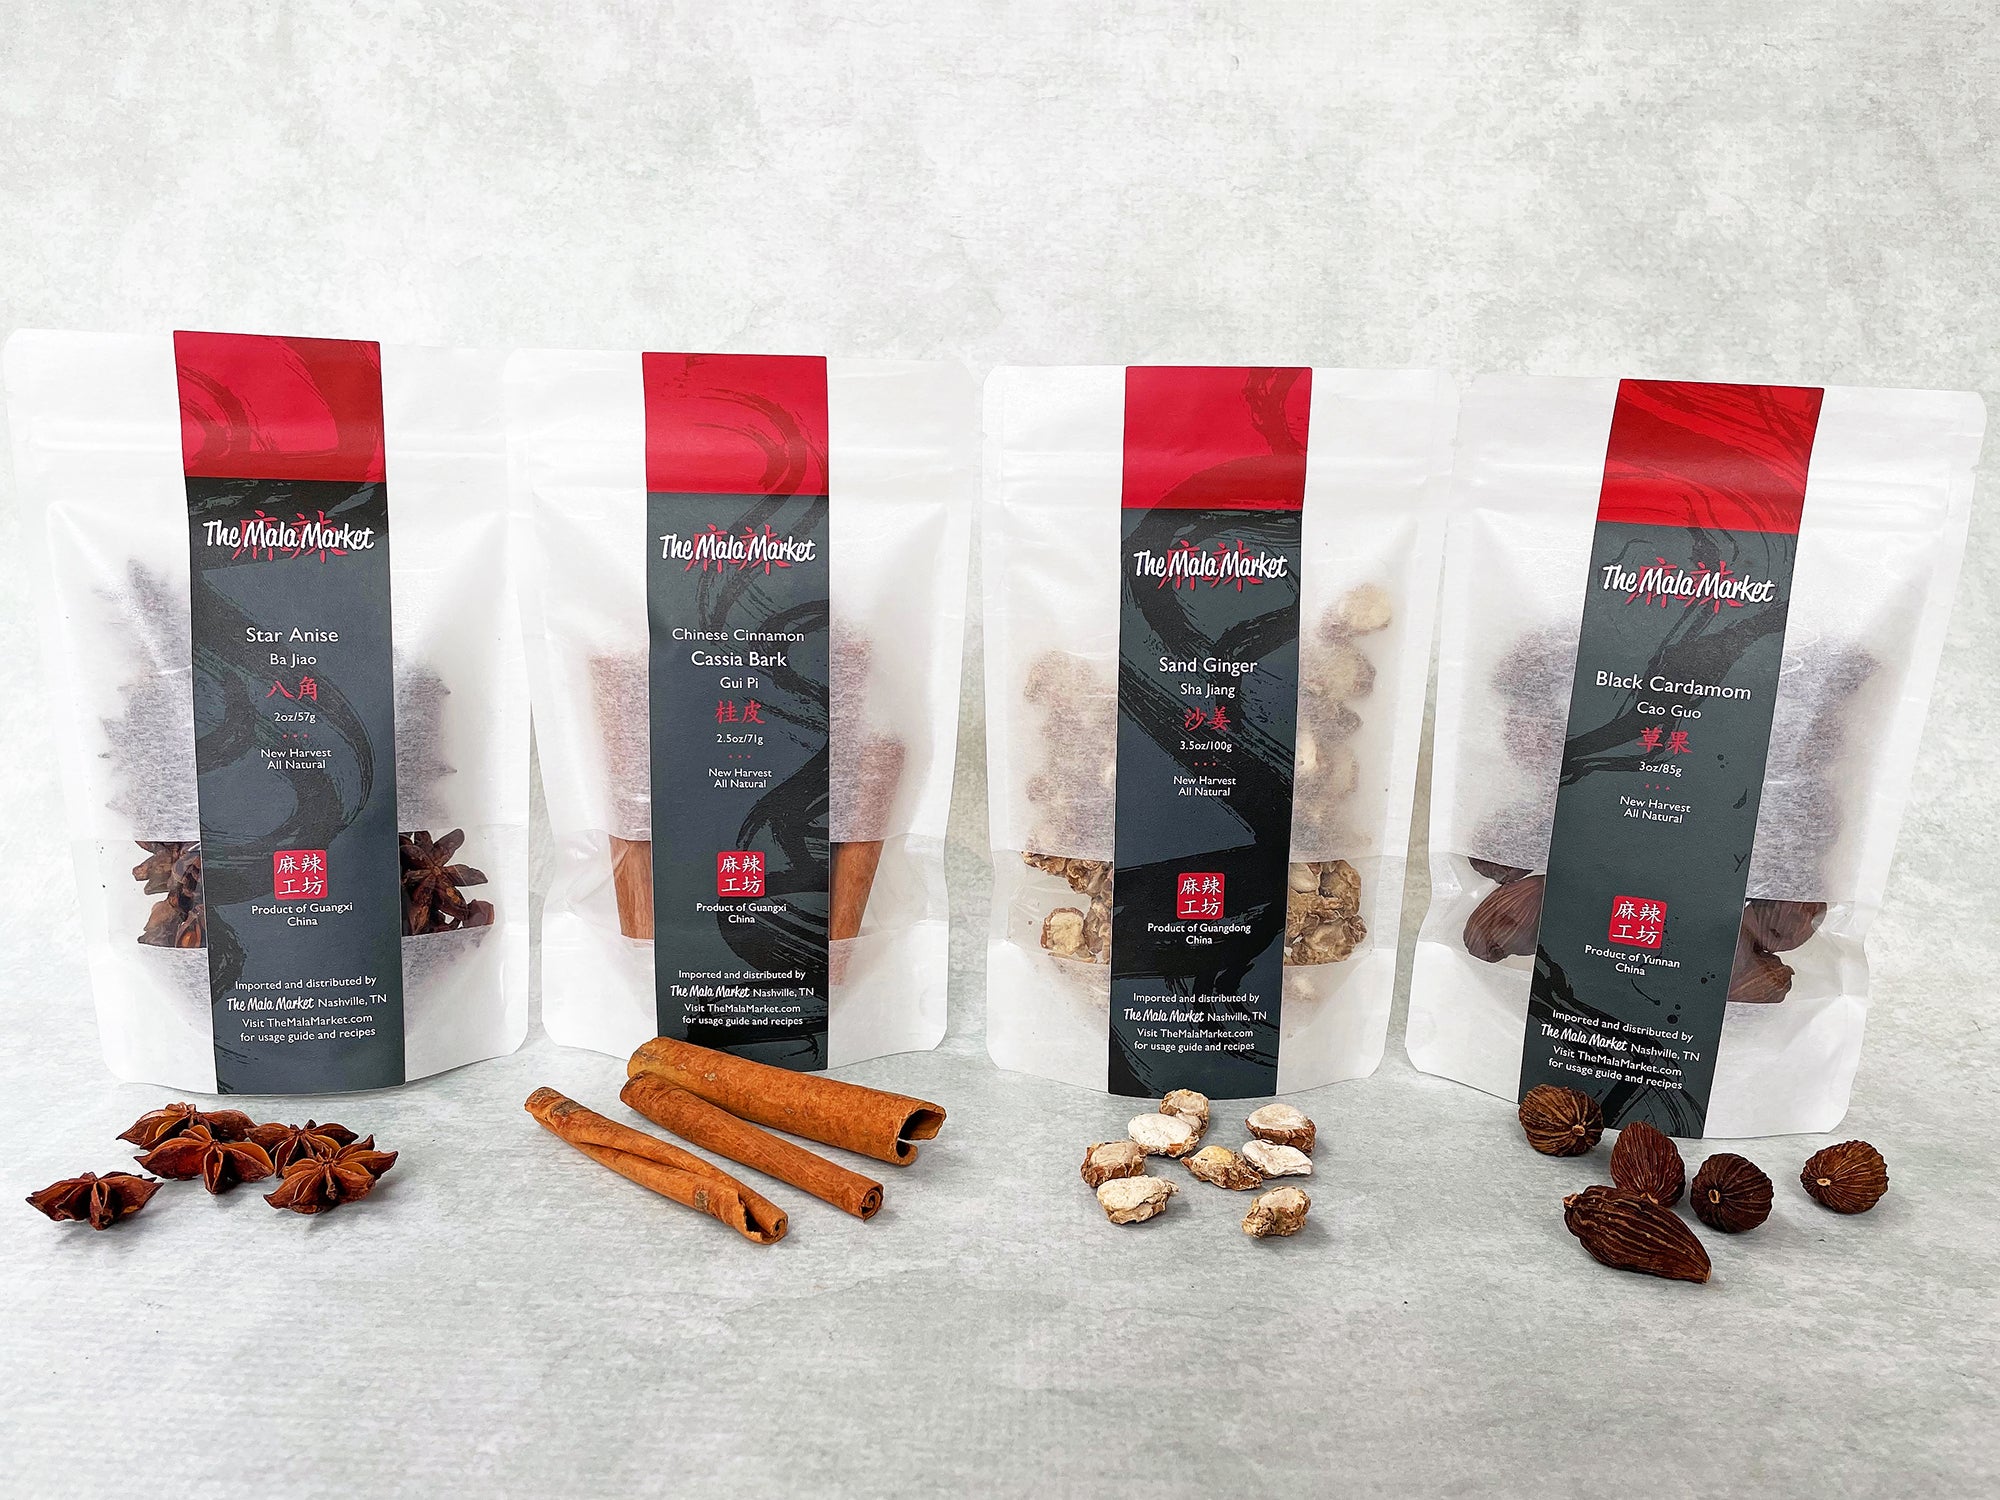 Chinese Spice Collection (Star Anise, Cassia Bark, Sand Ginger, Smoked Cao Guo)